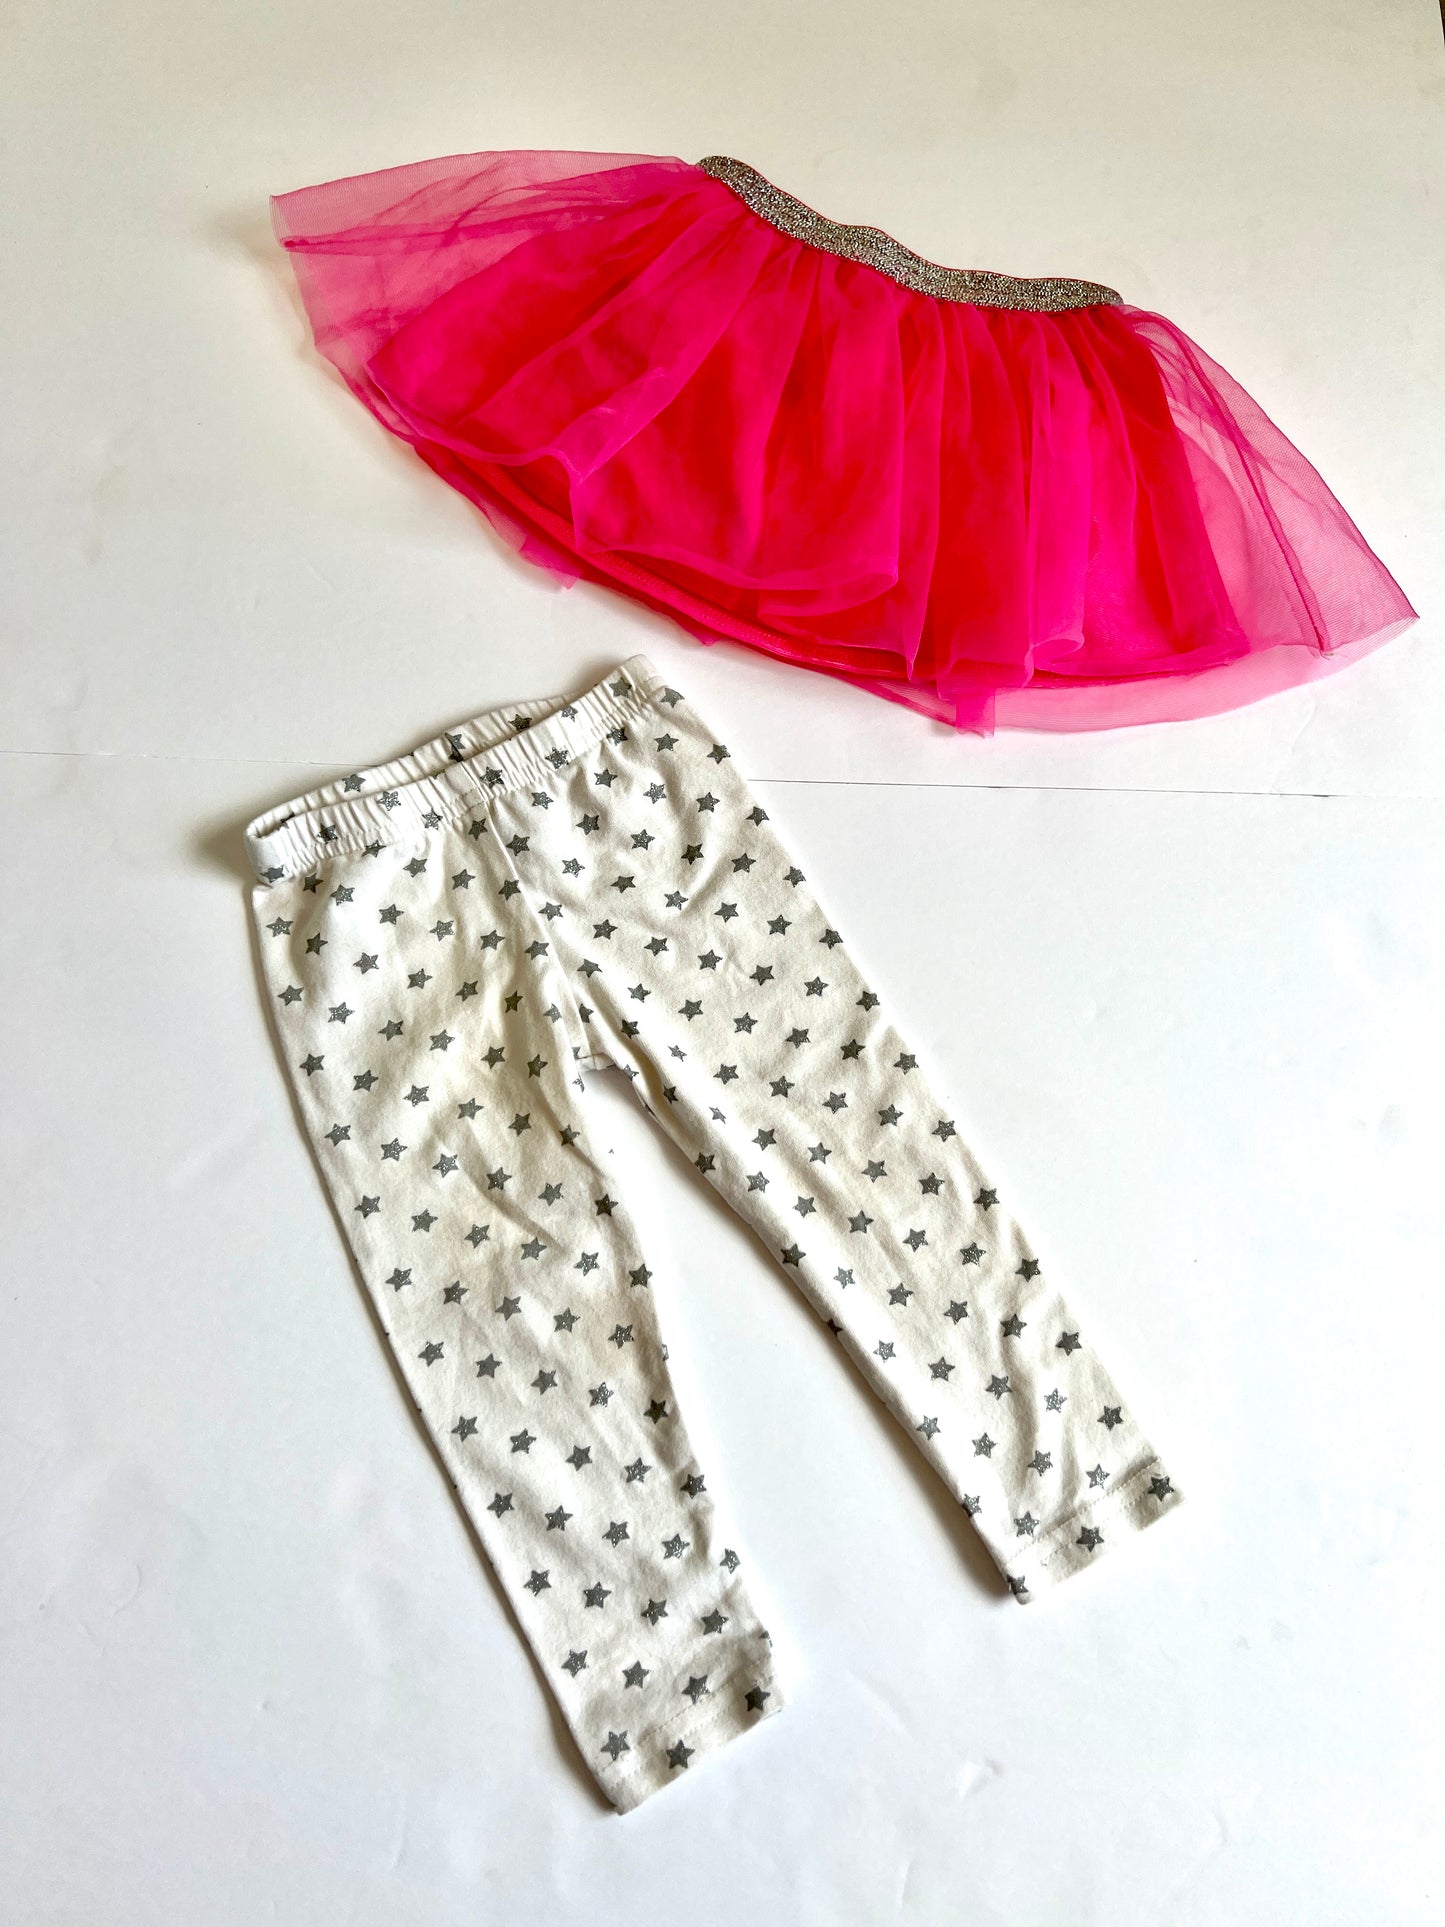 Girls 12M (2) Pieces (1) Legging Pant with Silver, Glitter Stars & (1) Pink Tulle Skort (Diaper Cover Pant) / Skirt